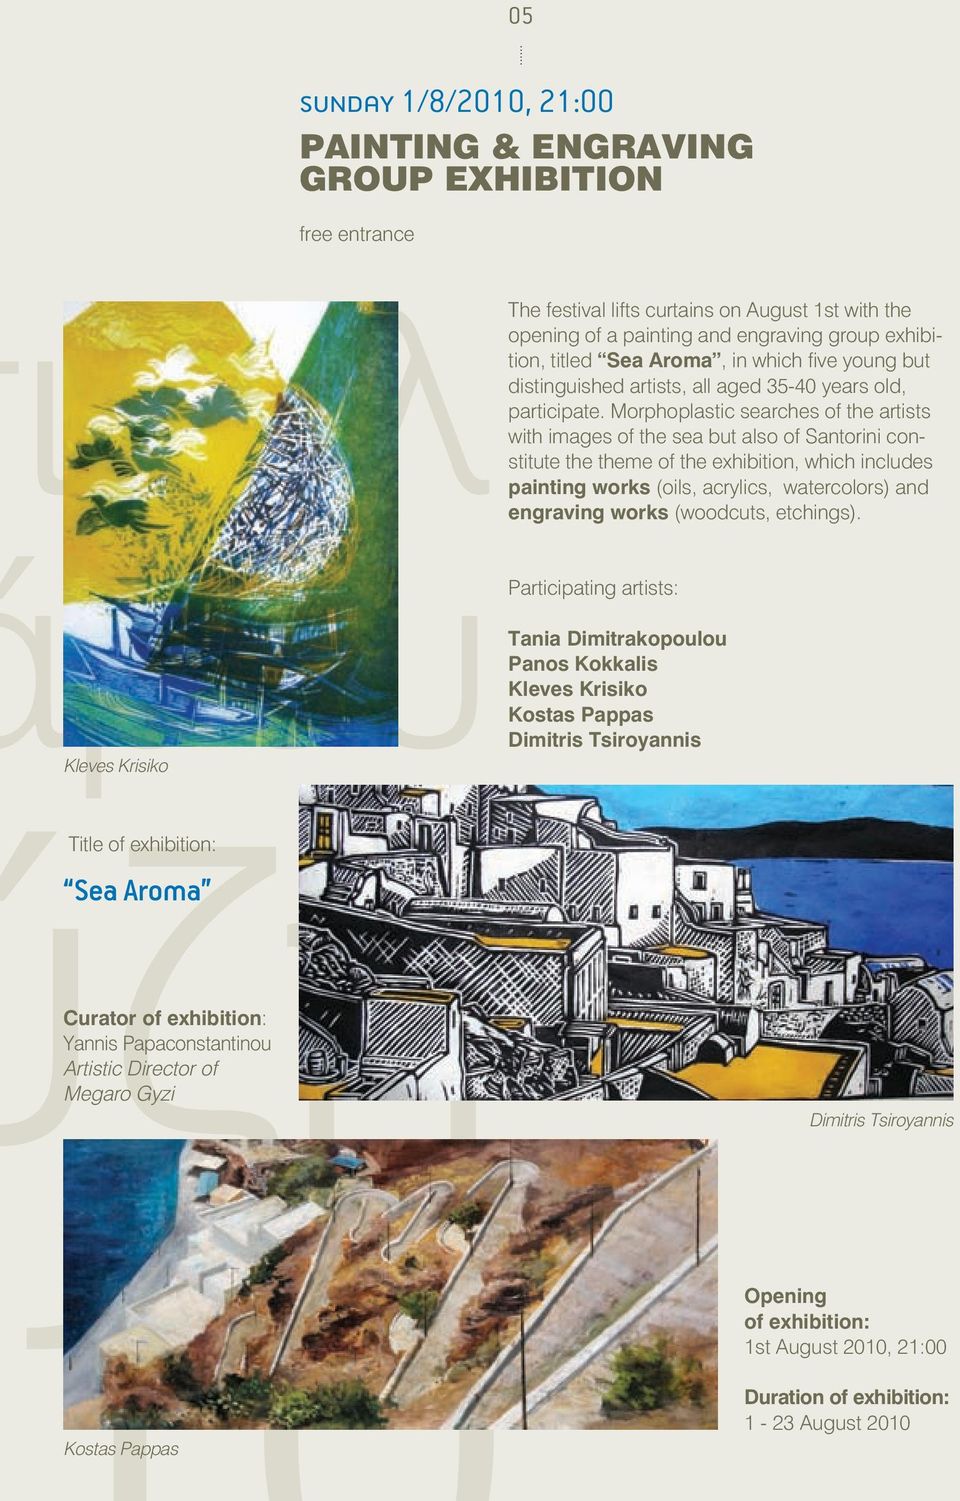 Morphoplastic searches of the artists with images of the sea but also of Santorini constitute the theme of the exhibition, which includes painting works (oils, acrylics, watercolors) and engraving